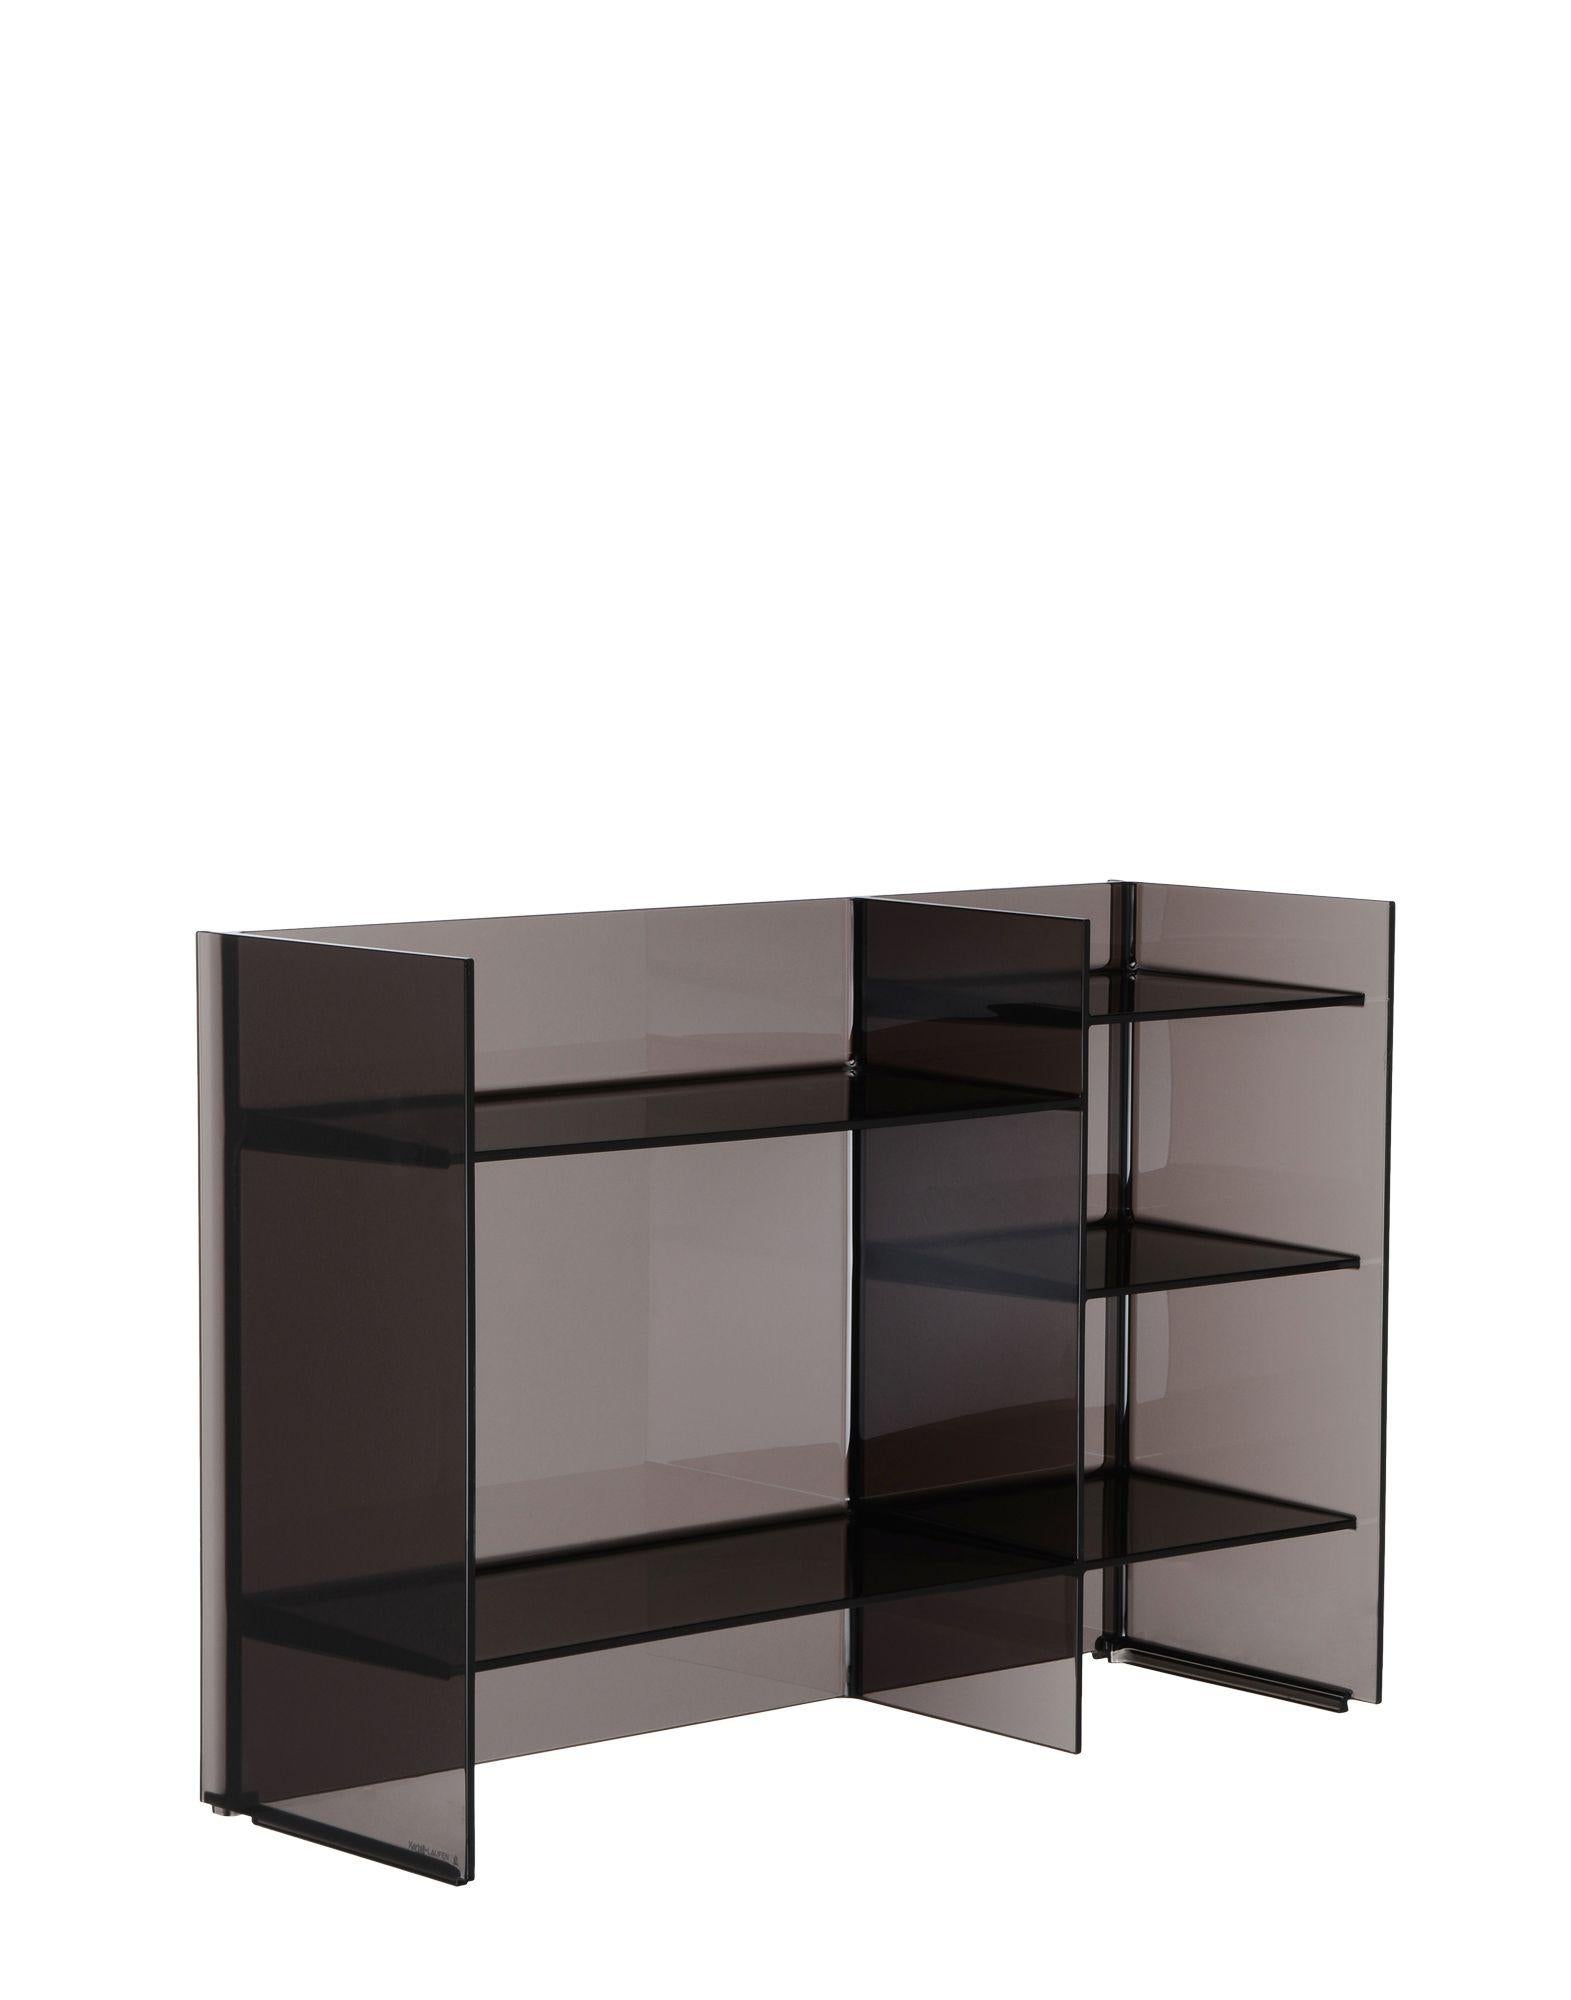 Multi-shaped and multi-purpose shelving system, stackable and modular, offering the possibility of creating a variety of geometric and chromatic compositions. This accessory can play the dual role as both container and room divider. It is a